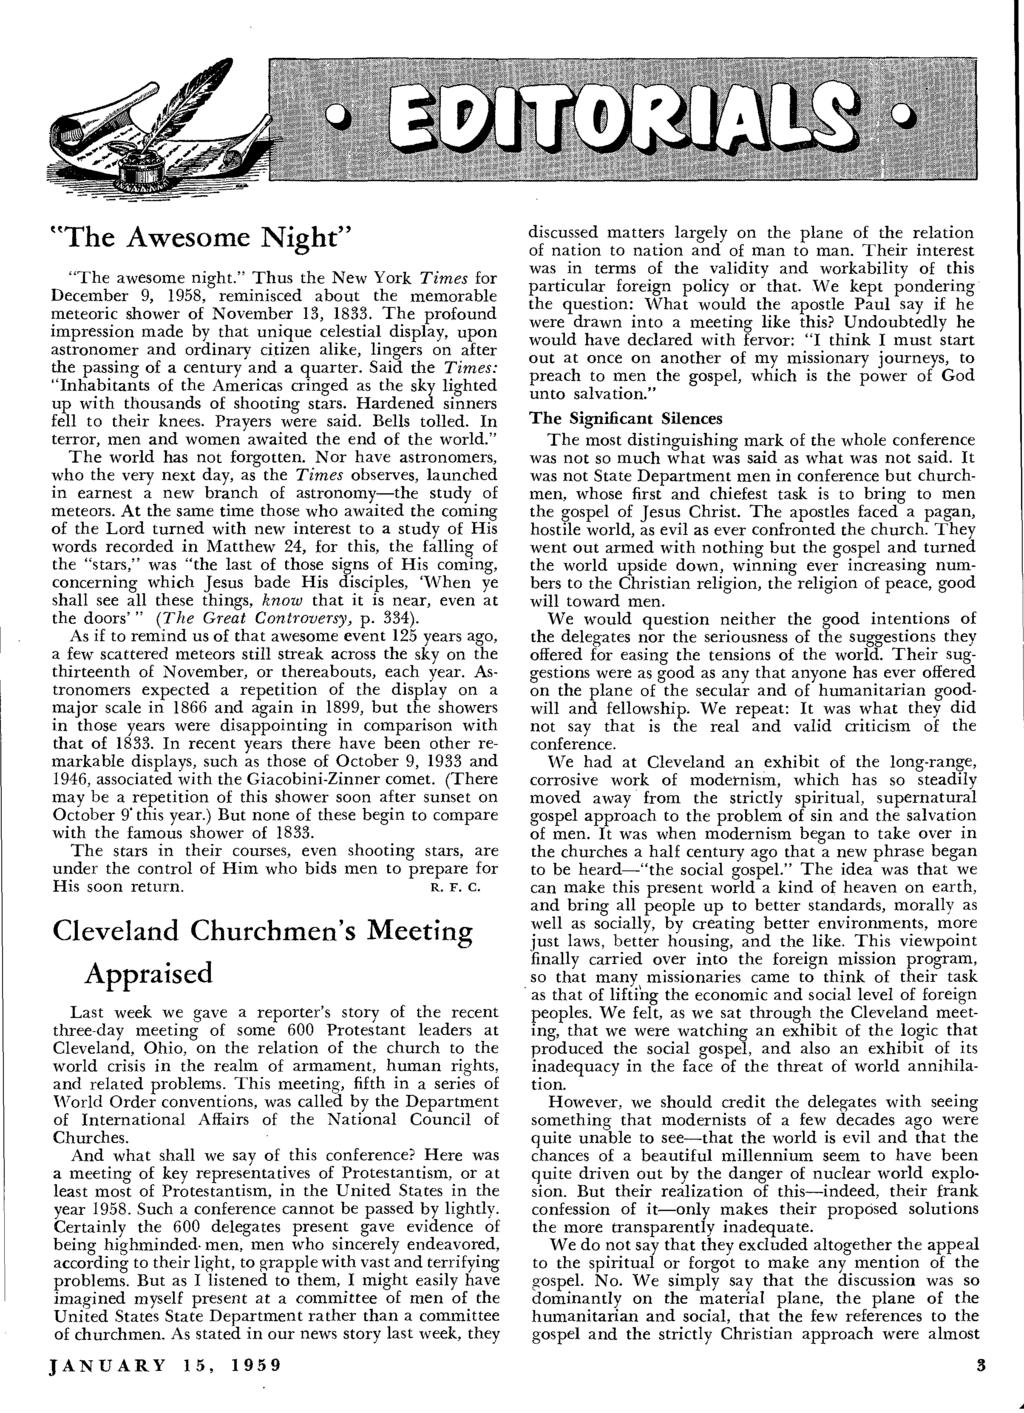 "The Awesome Night" "The awesome night." Thus the New York Times for December 9, 1958, reminisced about the memorable meteoric shower of November 13, 1833.